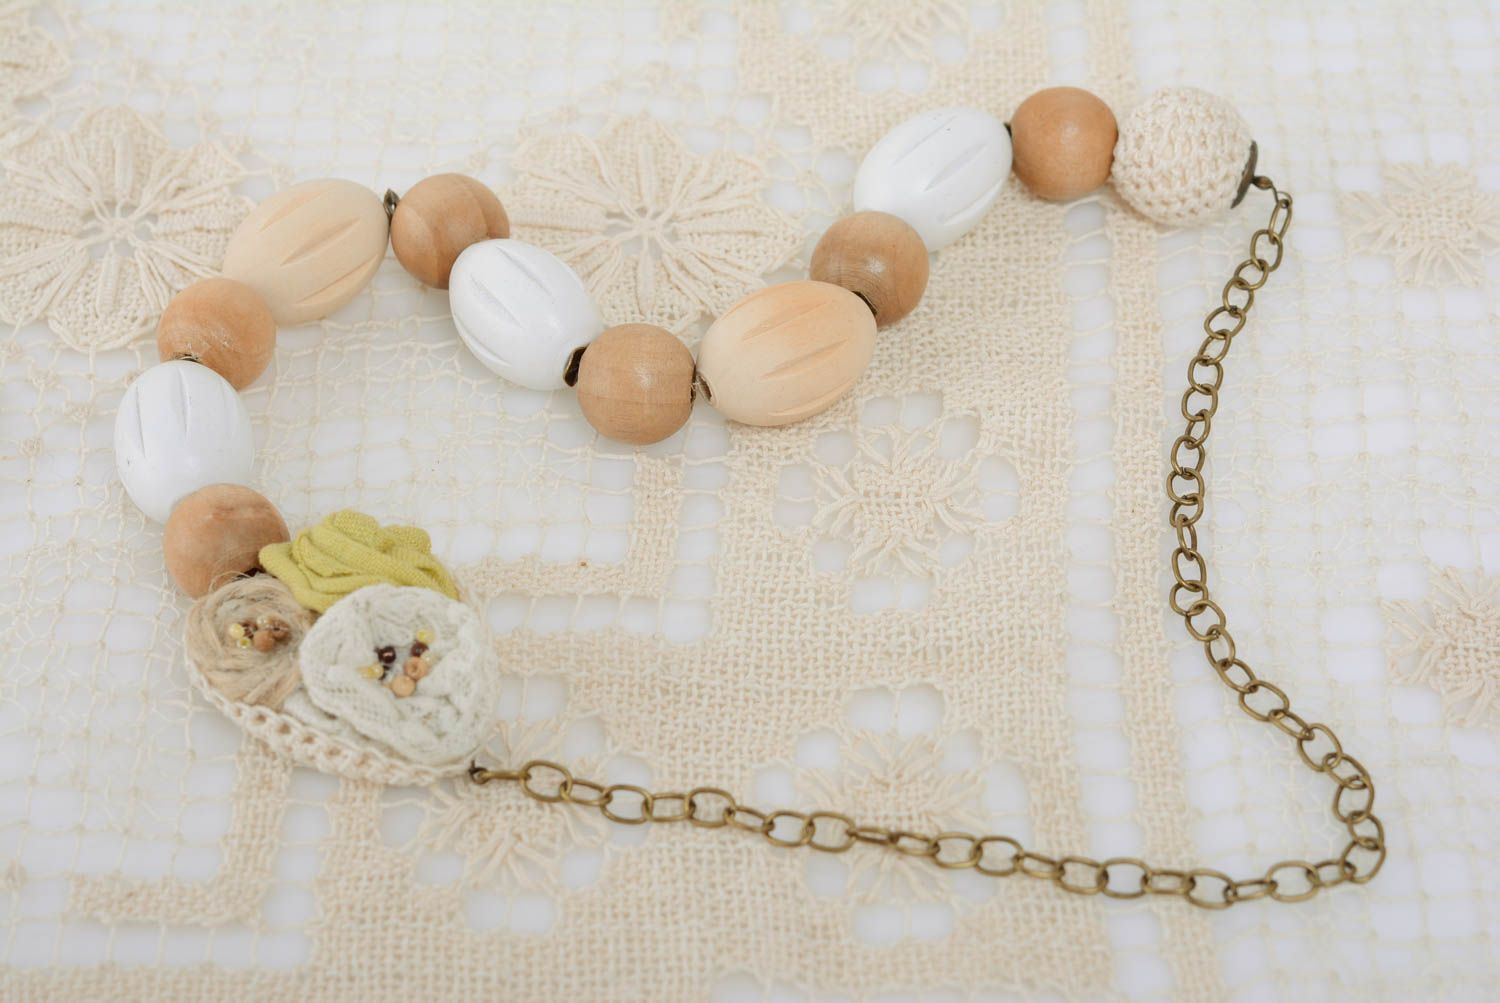 Handmade designer light wooden bead necklace on chain with fabric flowers photo 4